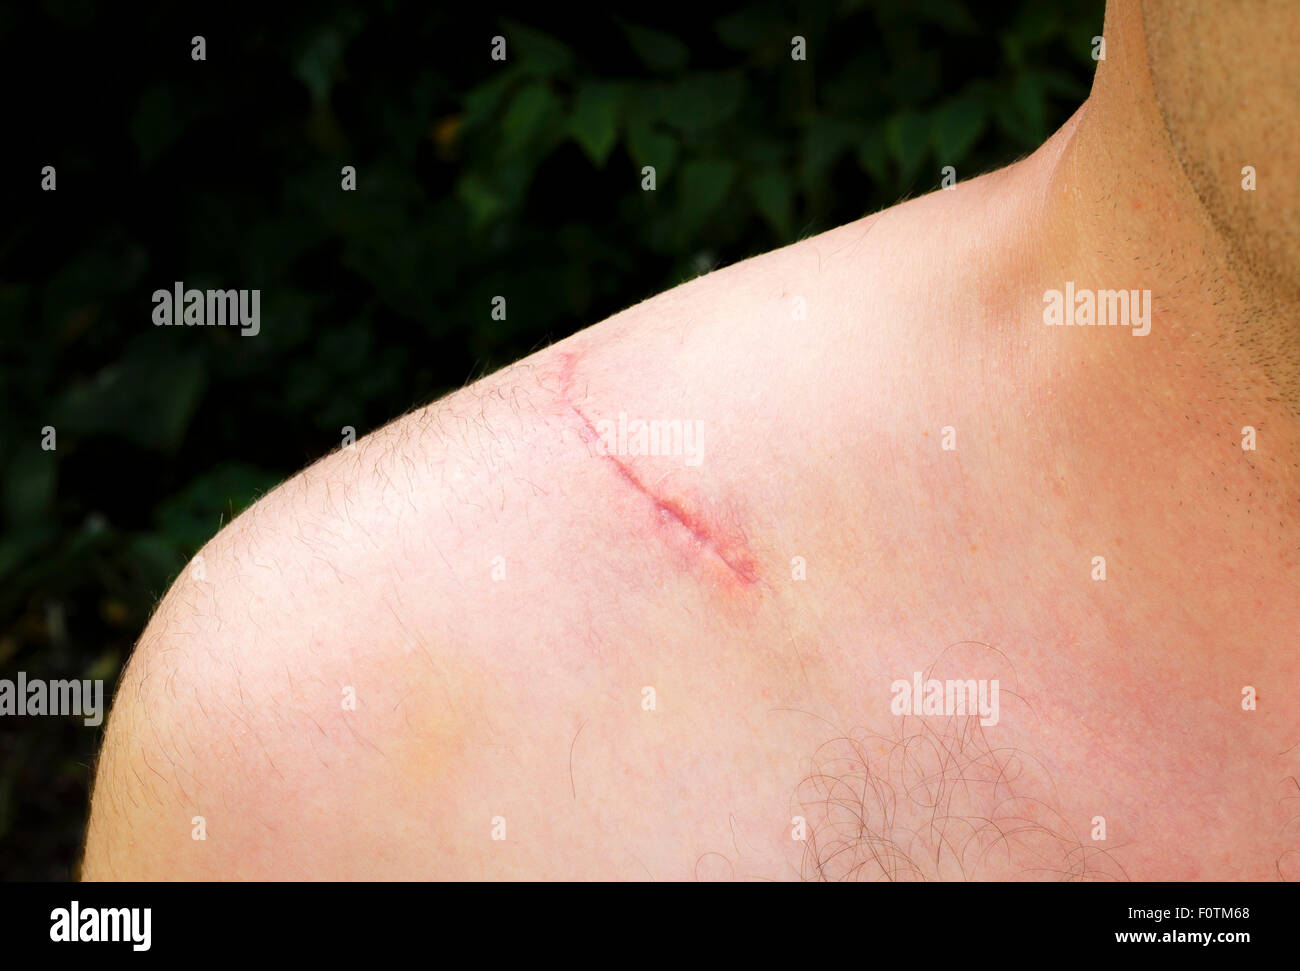 Closeup of surgical scar on the shoulder of a man following ORIF operation to repair a broken clavicle Stock Photo